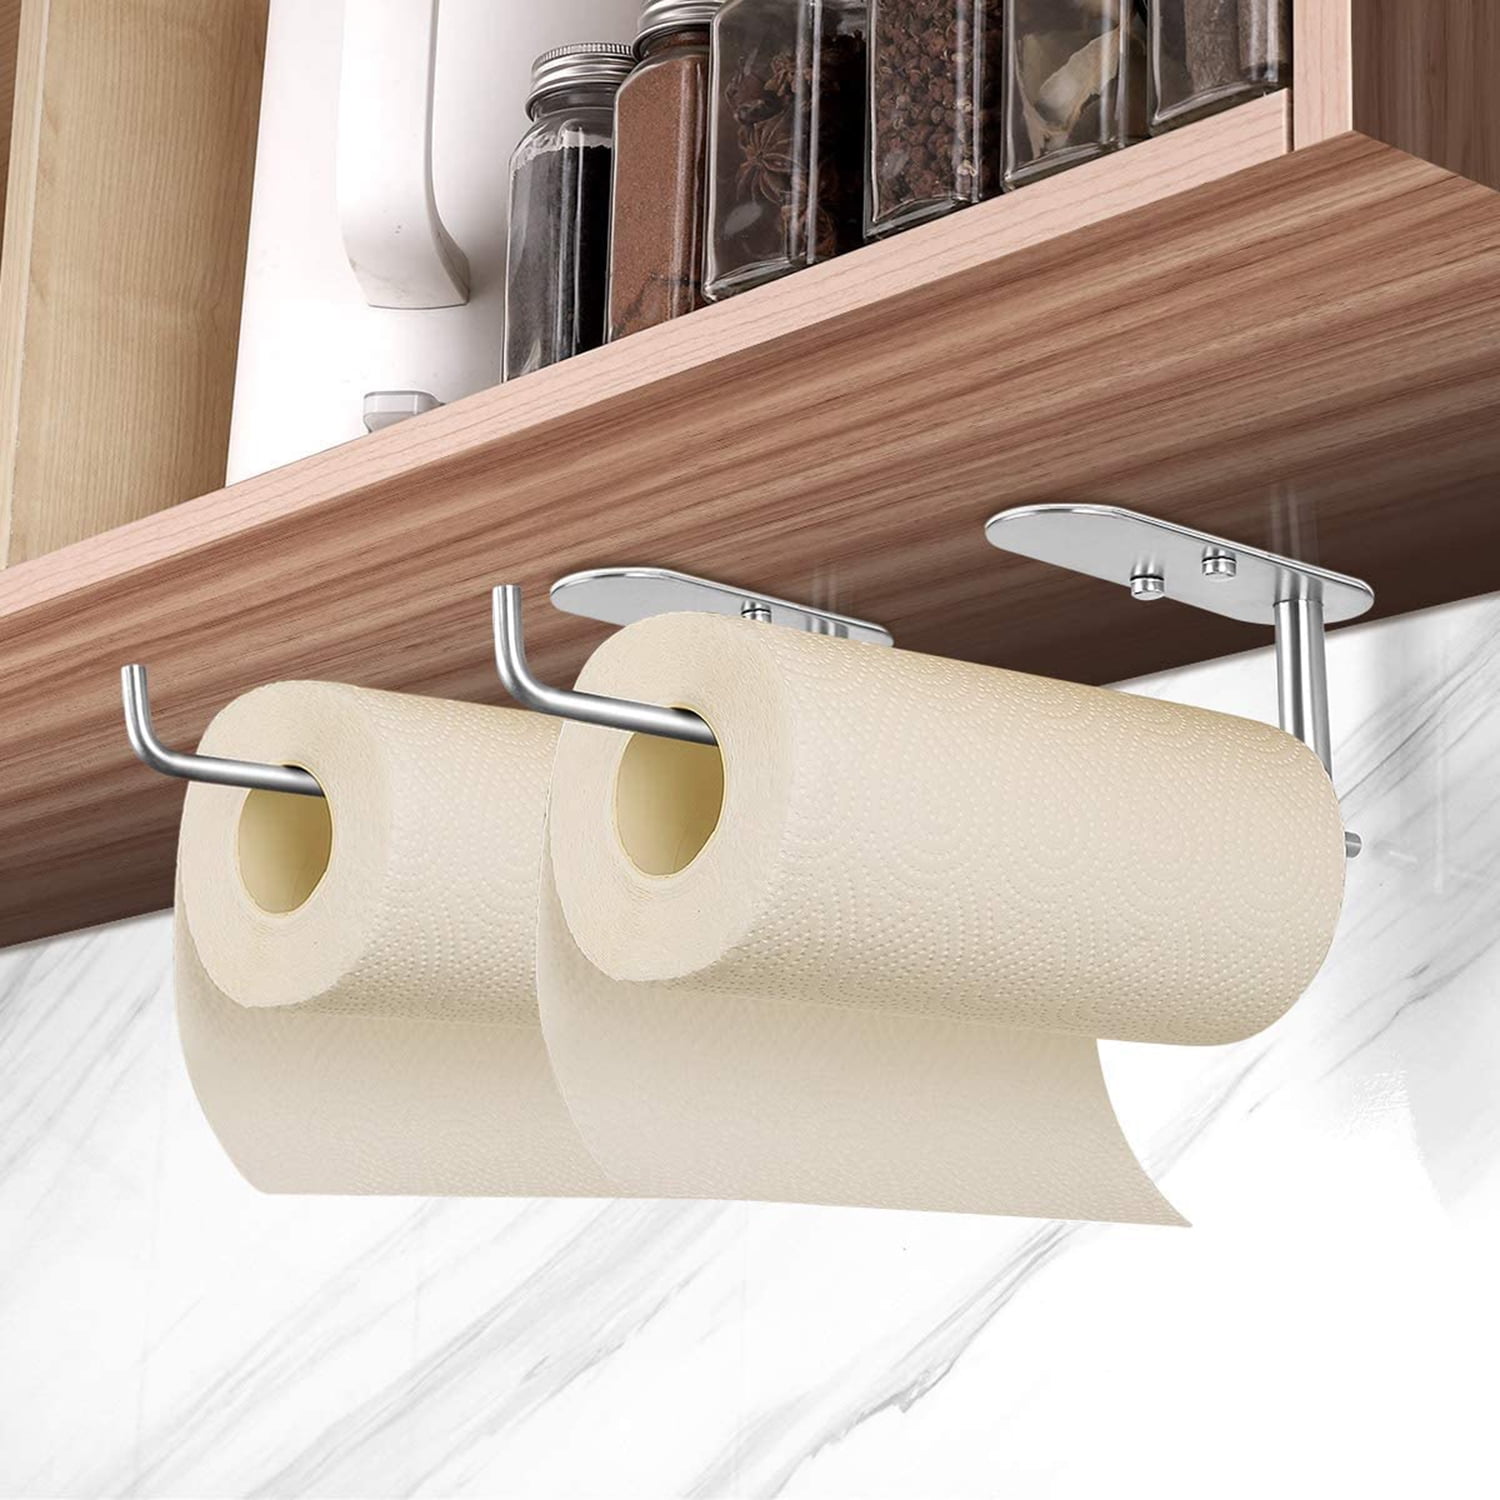 Kitchen Paper Towel Holder Punch Free Iron Under Counter Roll